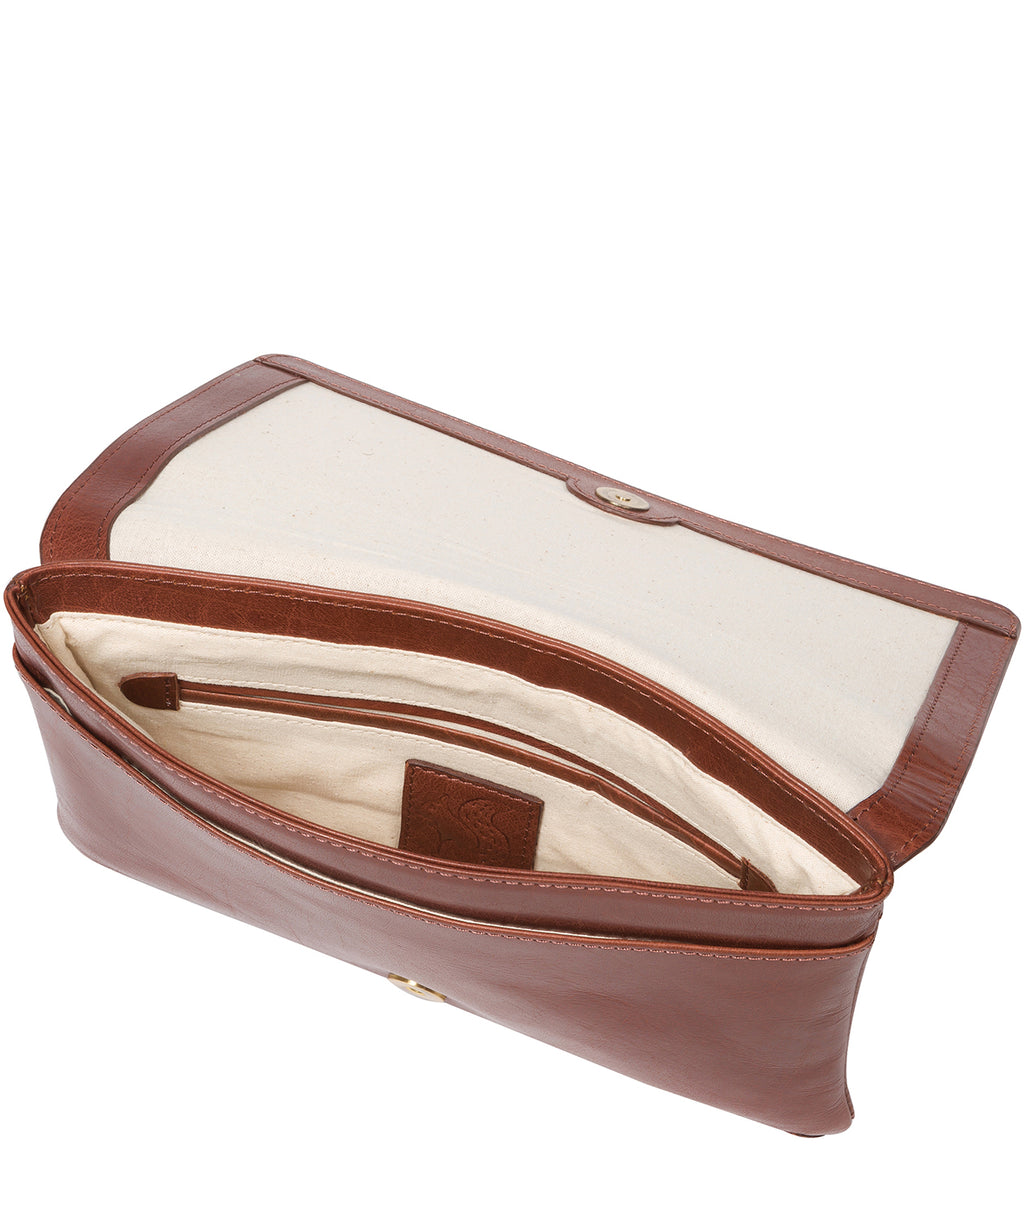 Brown Leather Clutch Bag 'Cherish' by Conkca London – Pure Luxuries London